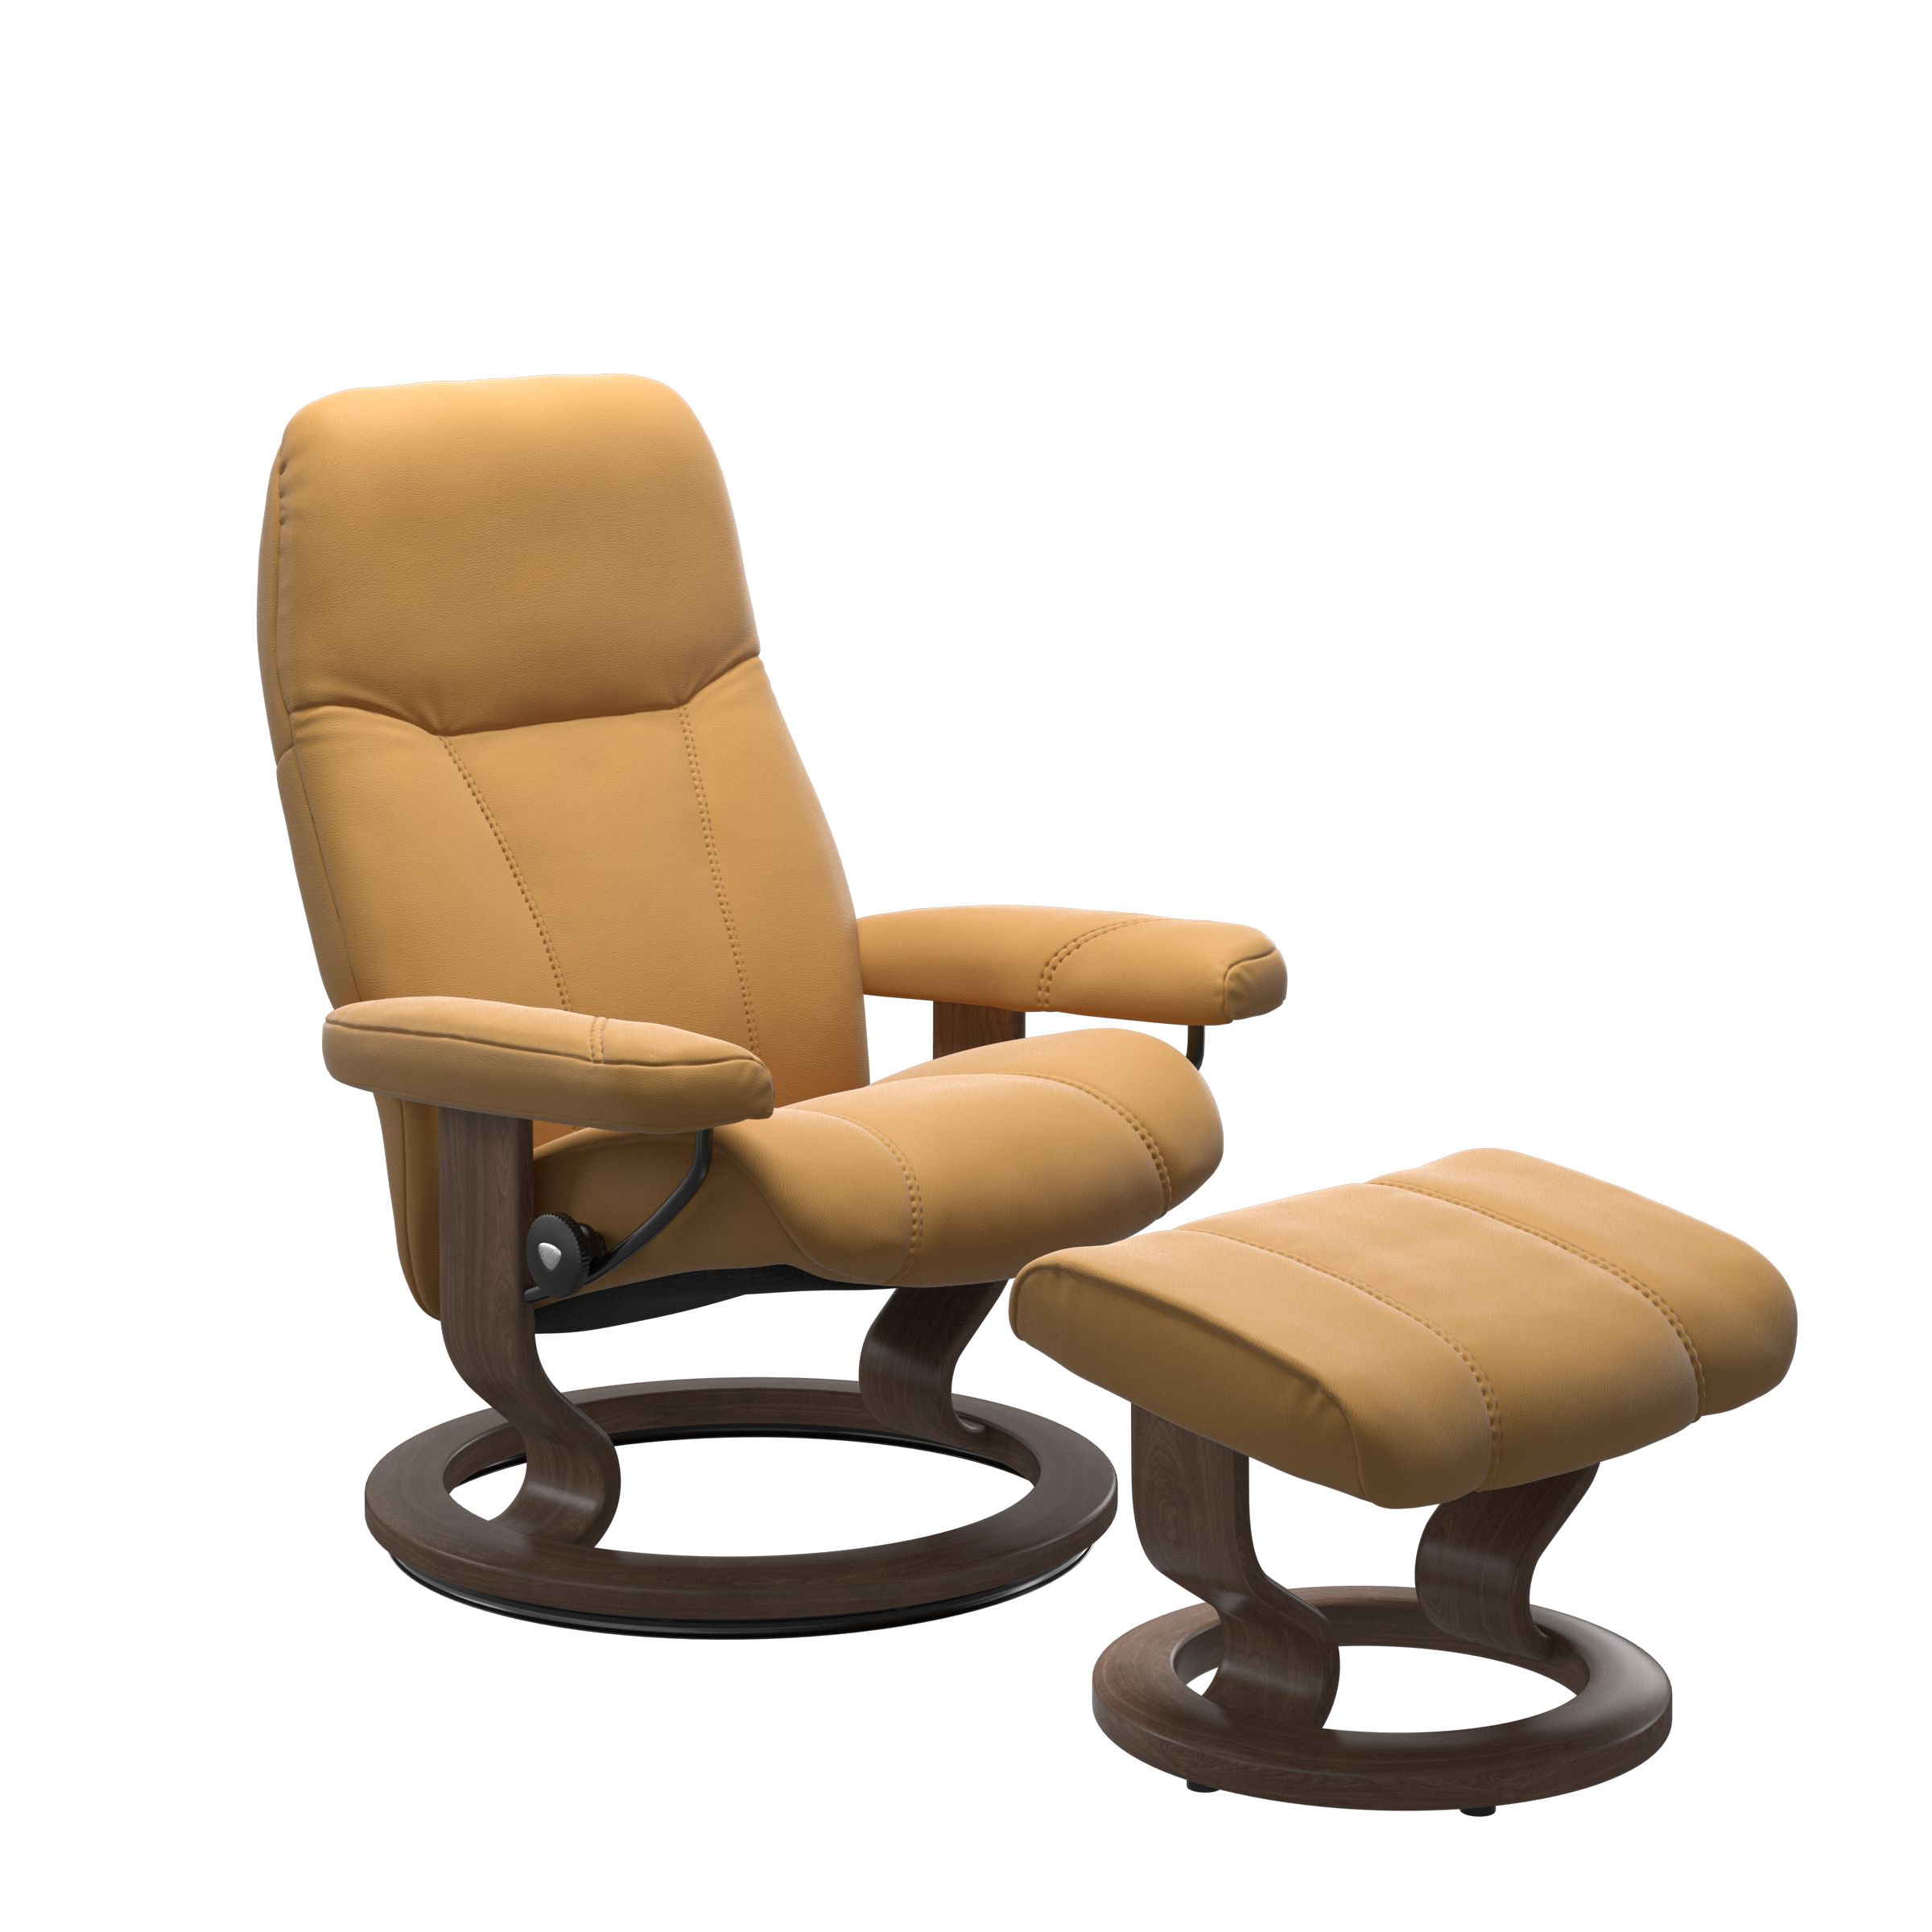 Stressless_Consul_large_recliner_by_Ekornes